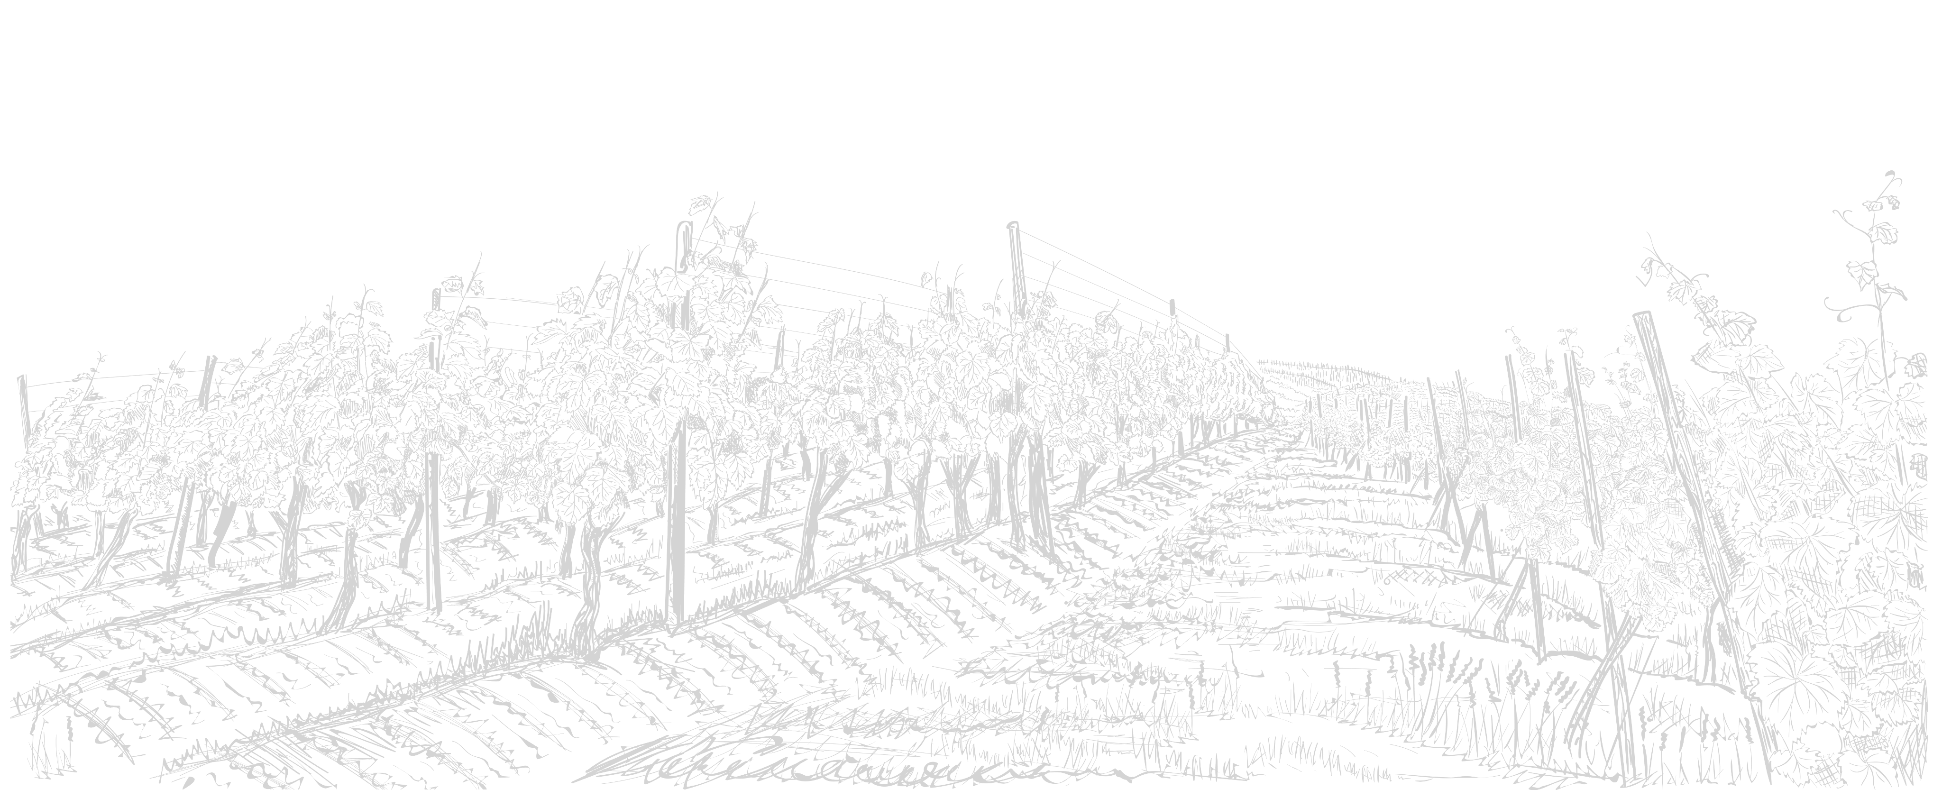 The vines of Château Borie Neuve in Badens in the Aude, varietal wines and PDO Minervois wines